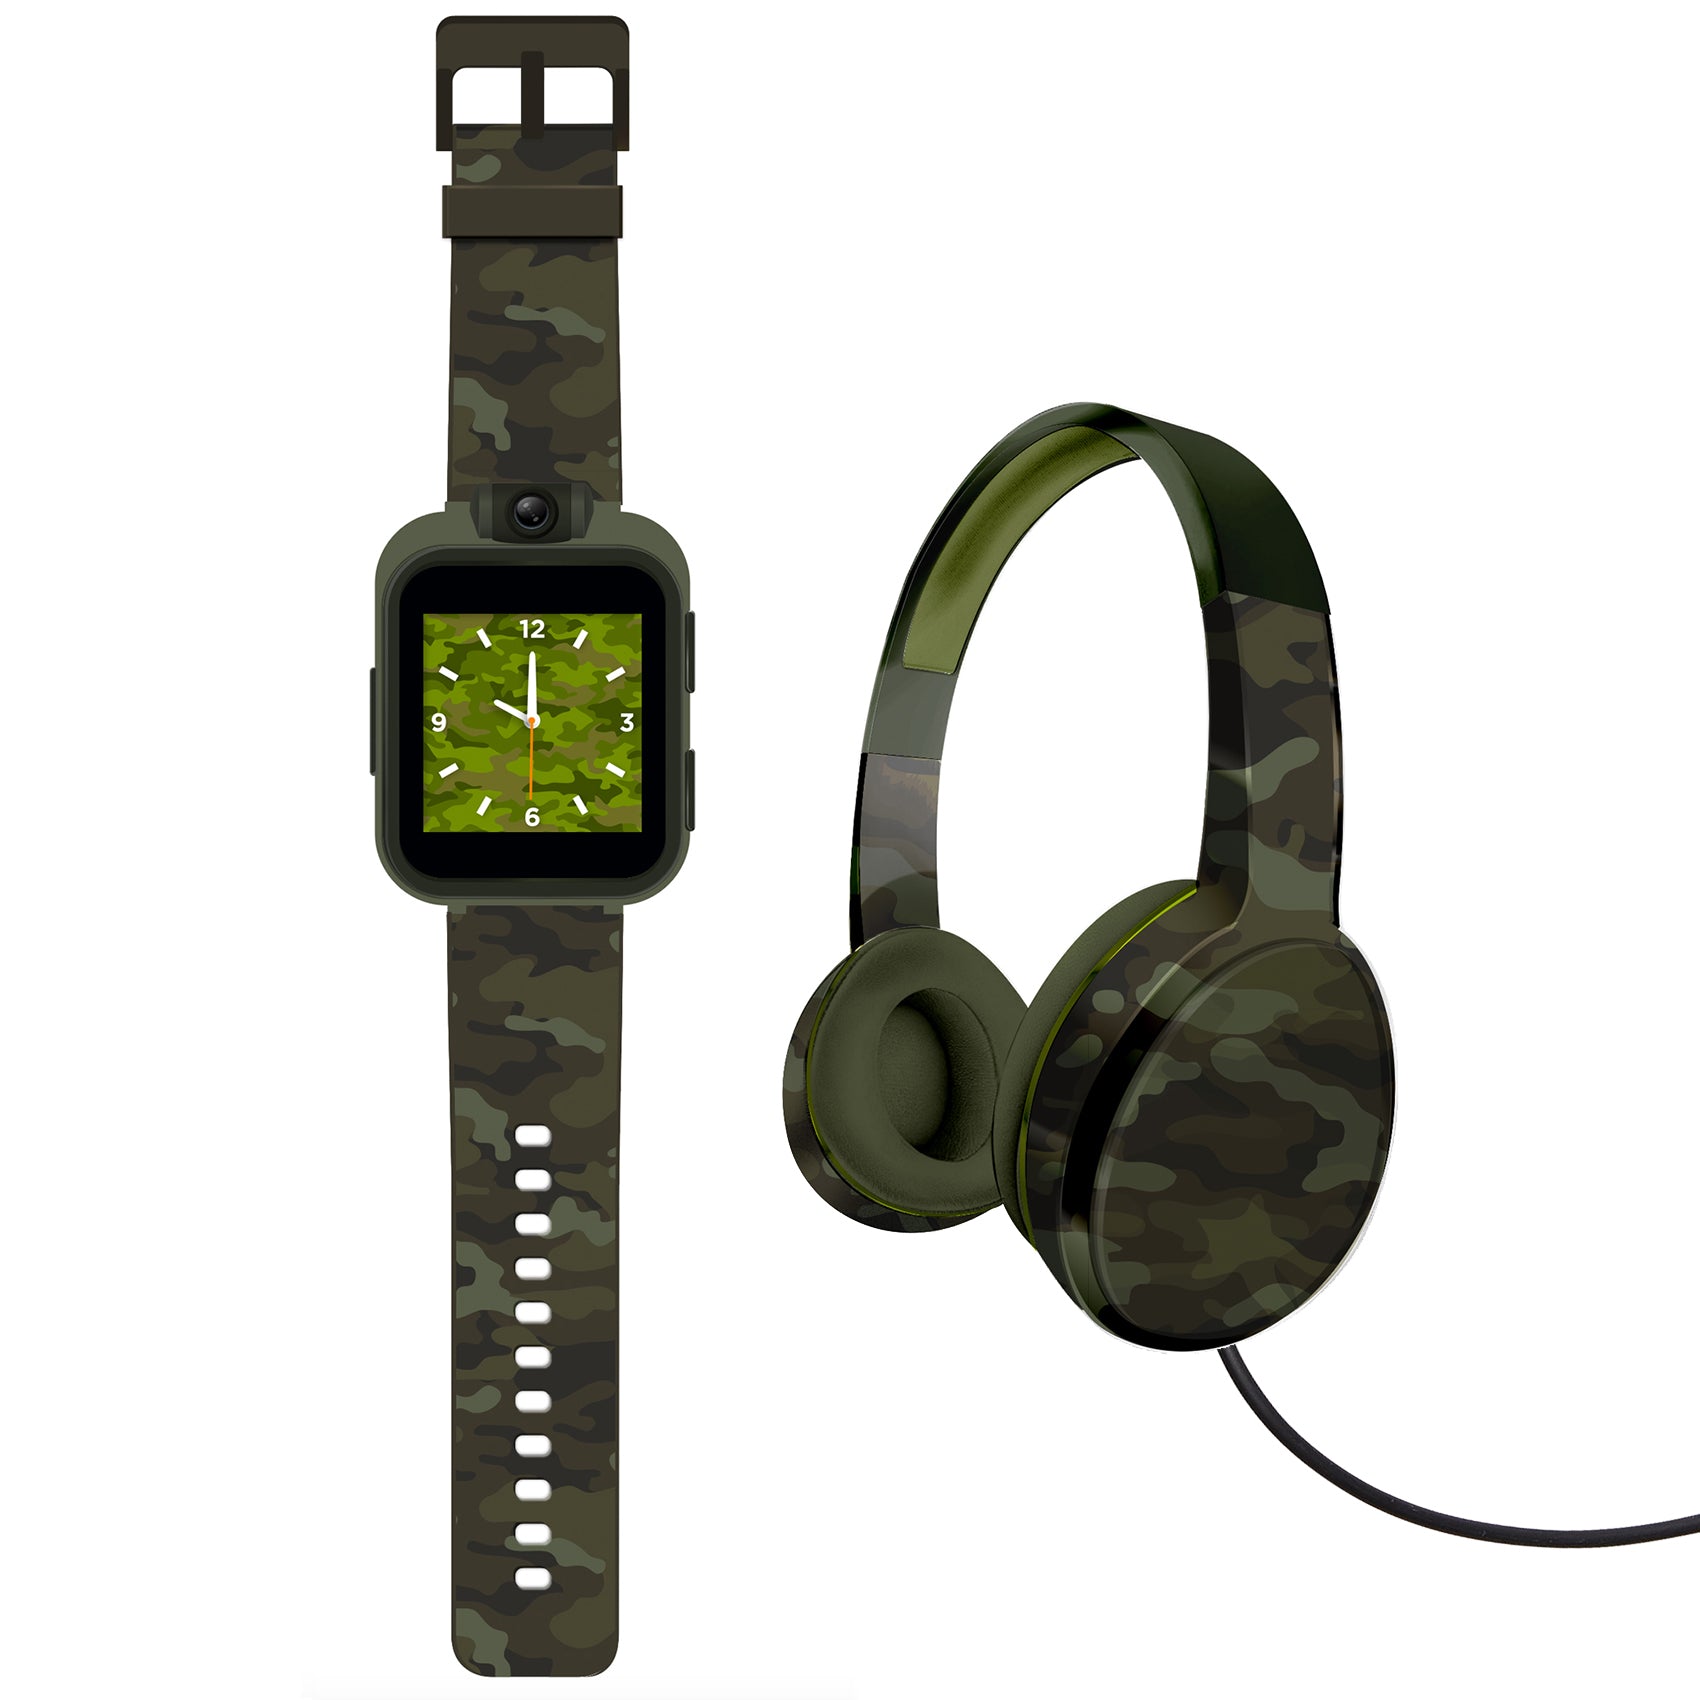 PlayZoom 2 Kids Smartwatch with Headphones: Green Camouflage Print affordable smart watch with headphones